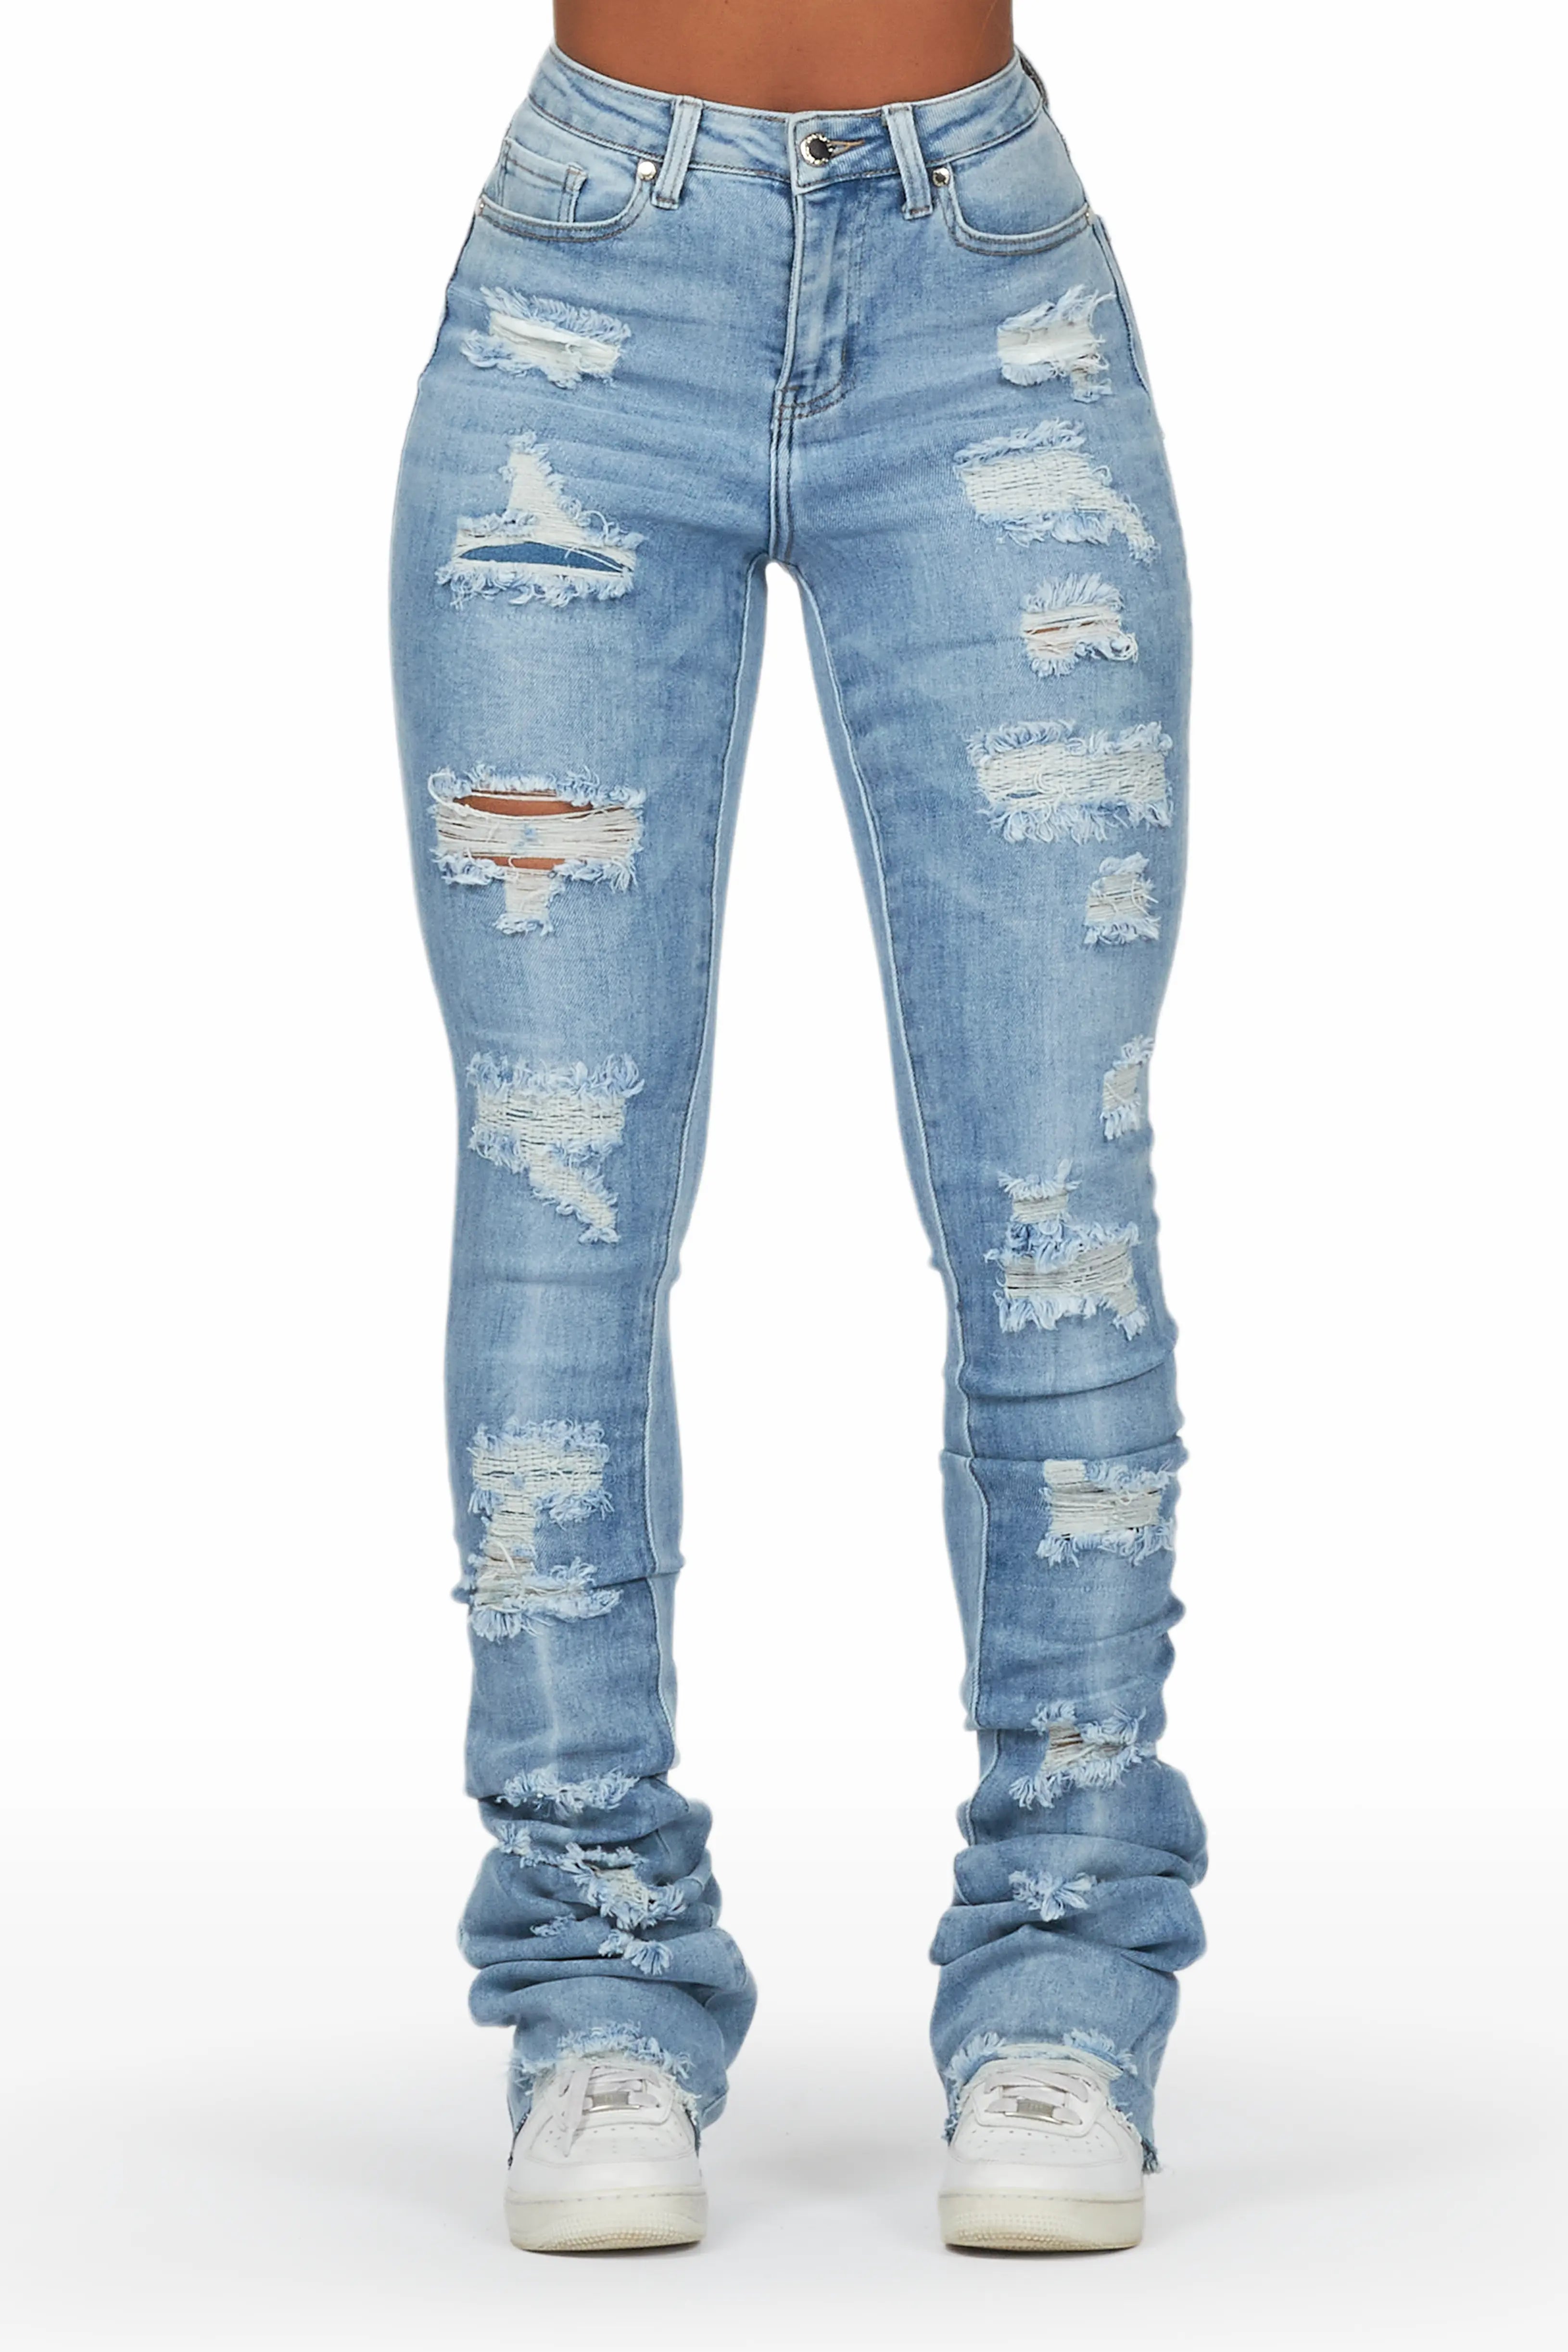 Get ready then turn heads w Rockstar Womens Jeans 👖 Find stacked